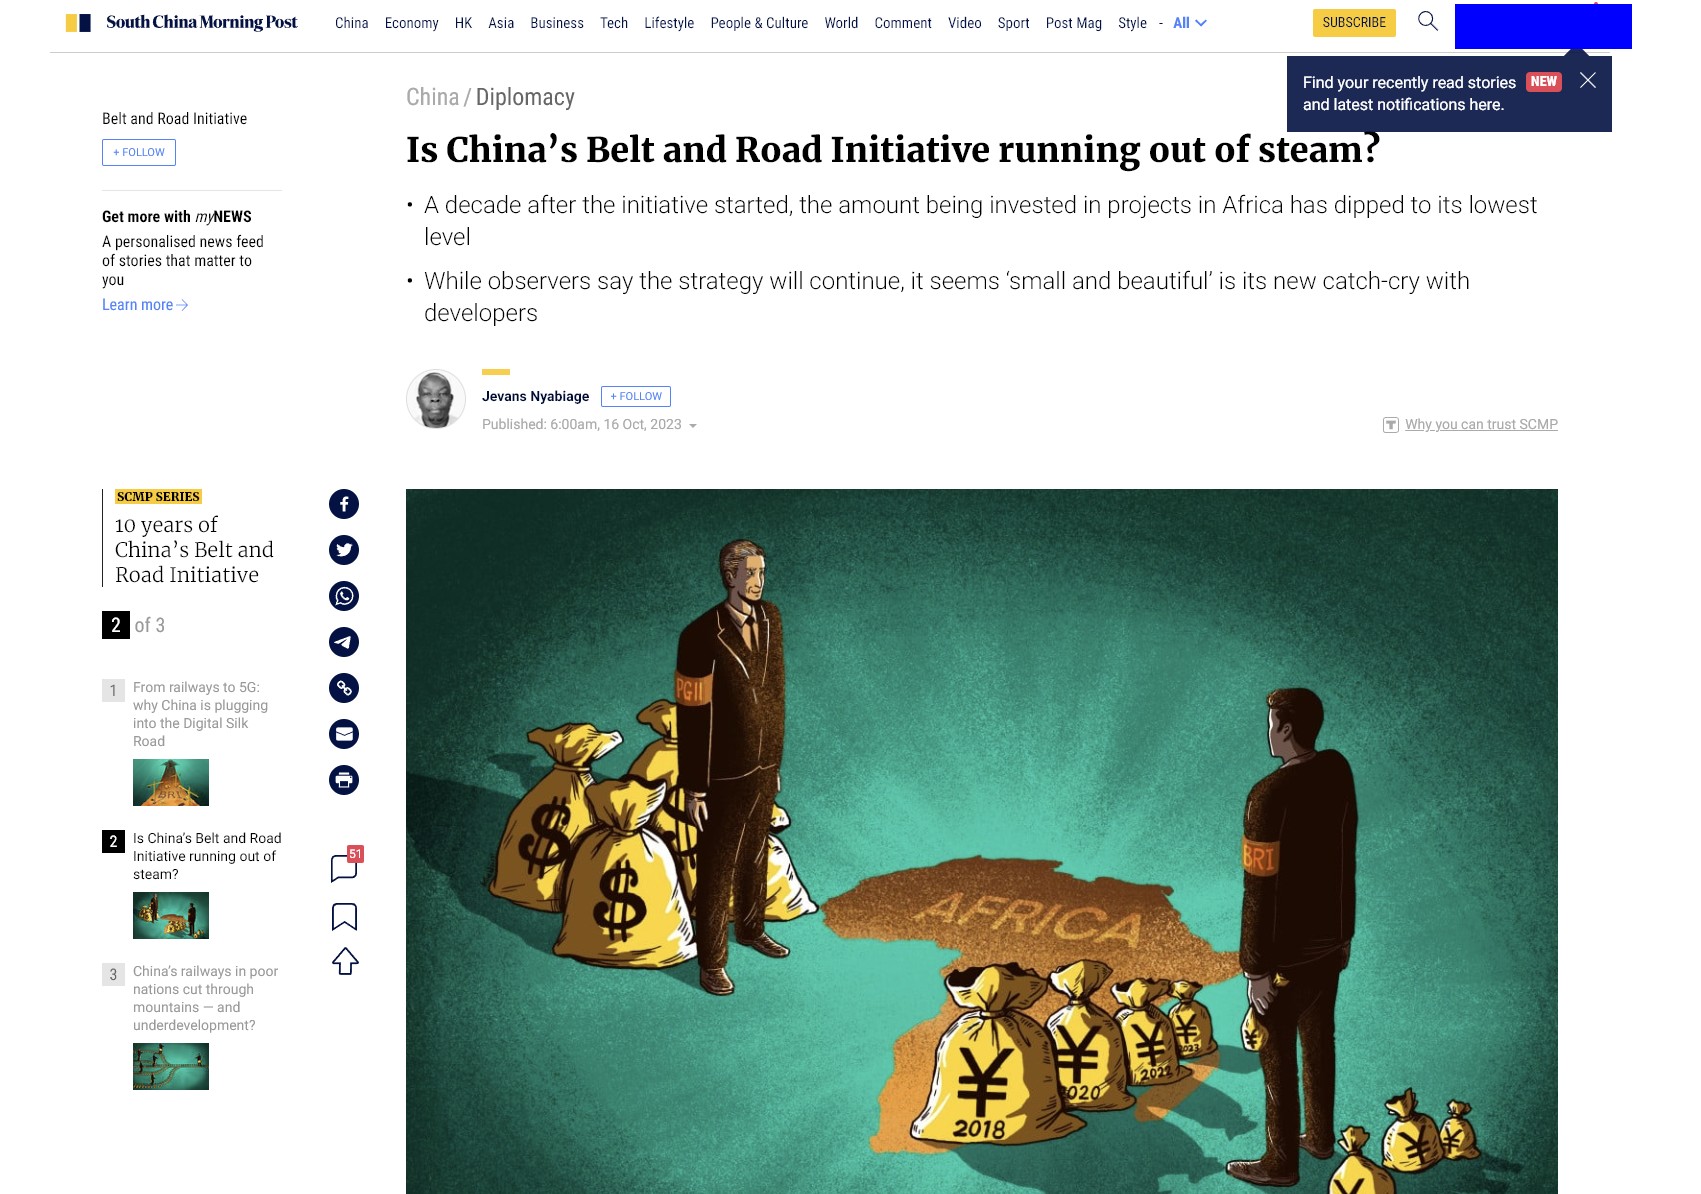 South China Morning Post: Τελειώνει η πρωτοβουλία Belt and Road της Κίνας;